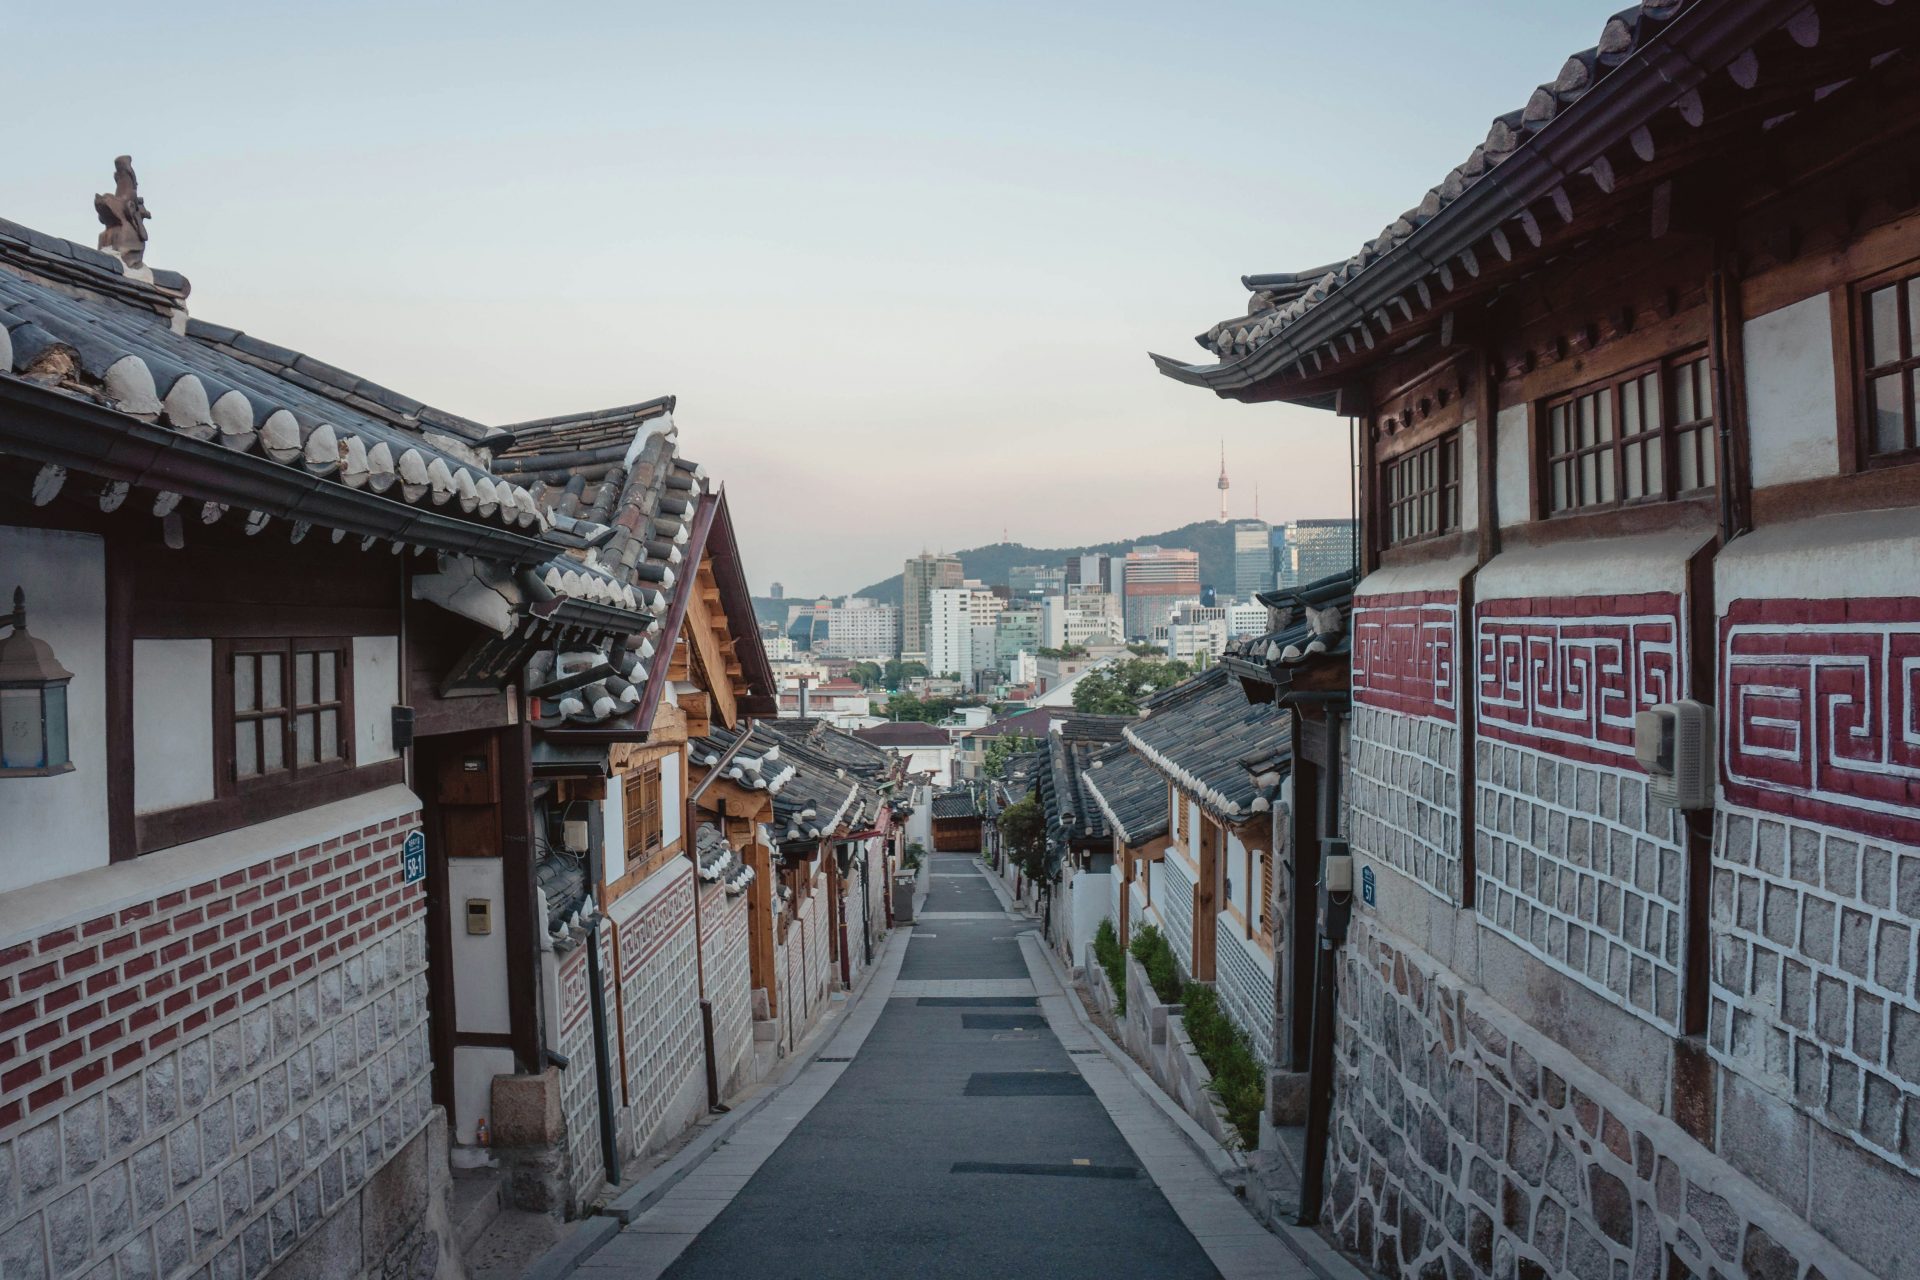 <p>Take a break at one of the stylish cafes dotted around the area and enjoy visiting the 'Bukchon Hakkei' selected by the city of Seoul.</p> <p>Image: YK / Unsplash</p>